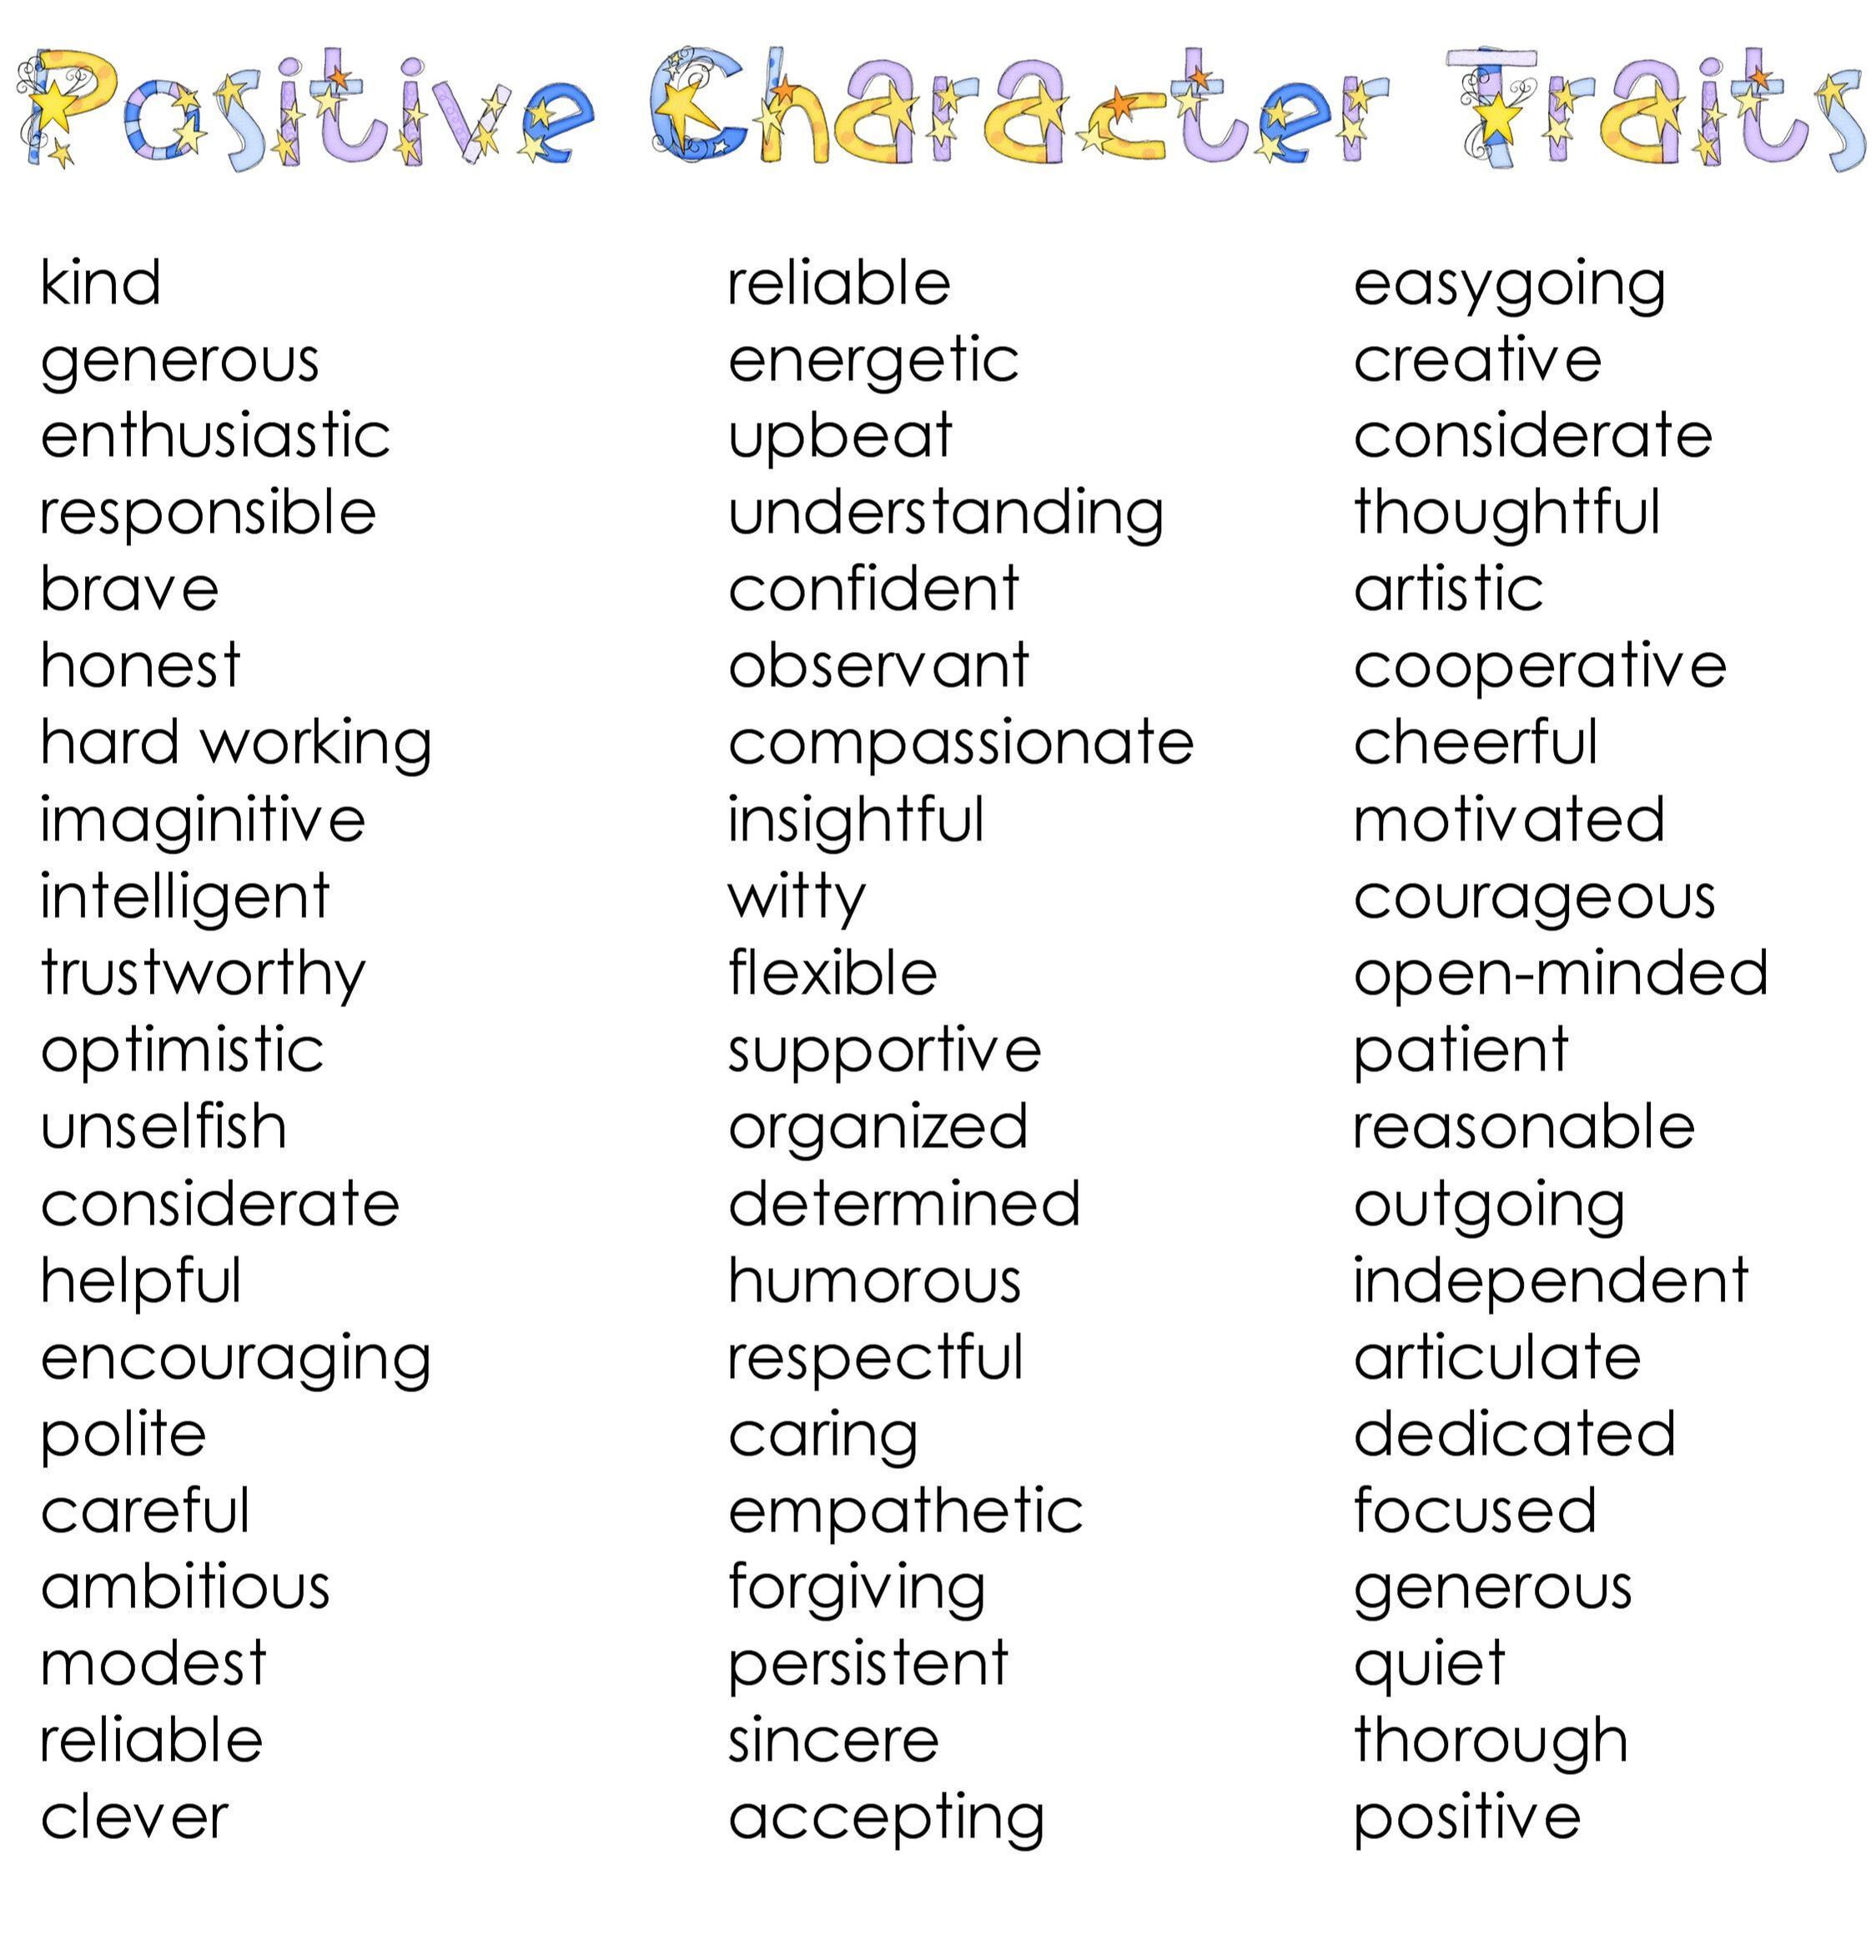 category-adjectives